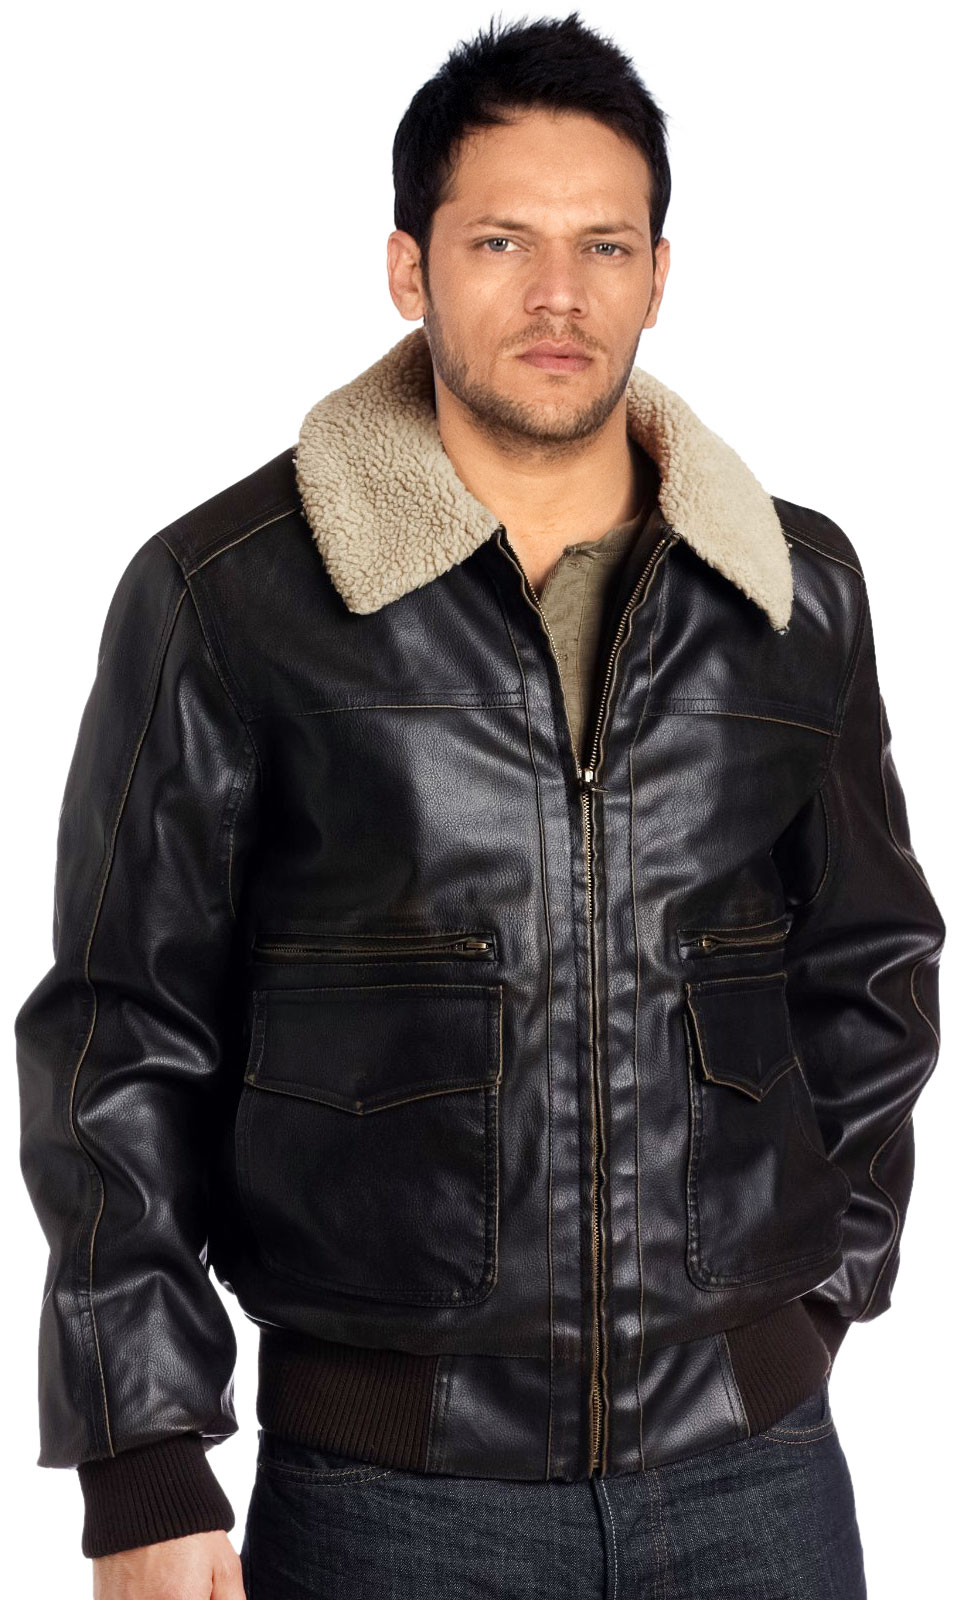 Leather Bombers Jacket – An Amazing Outfit That Men Cannot Resist